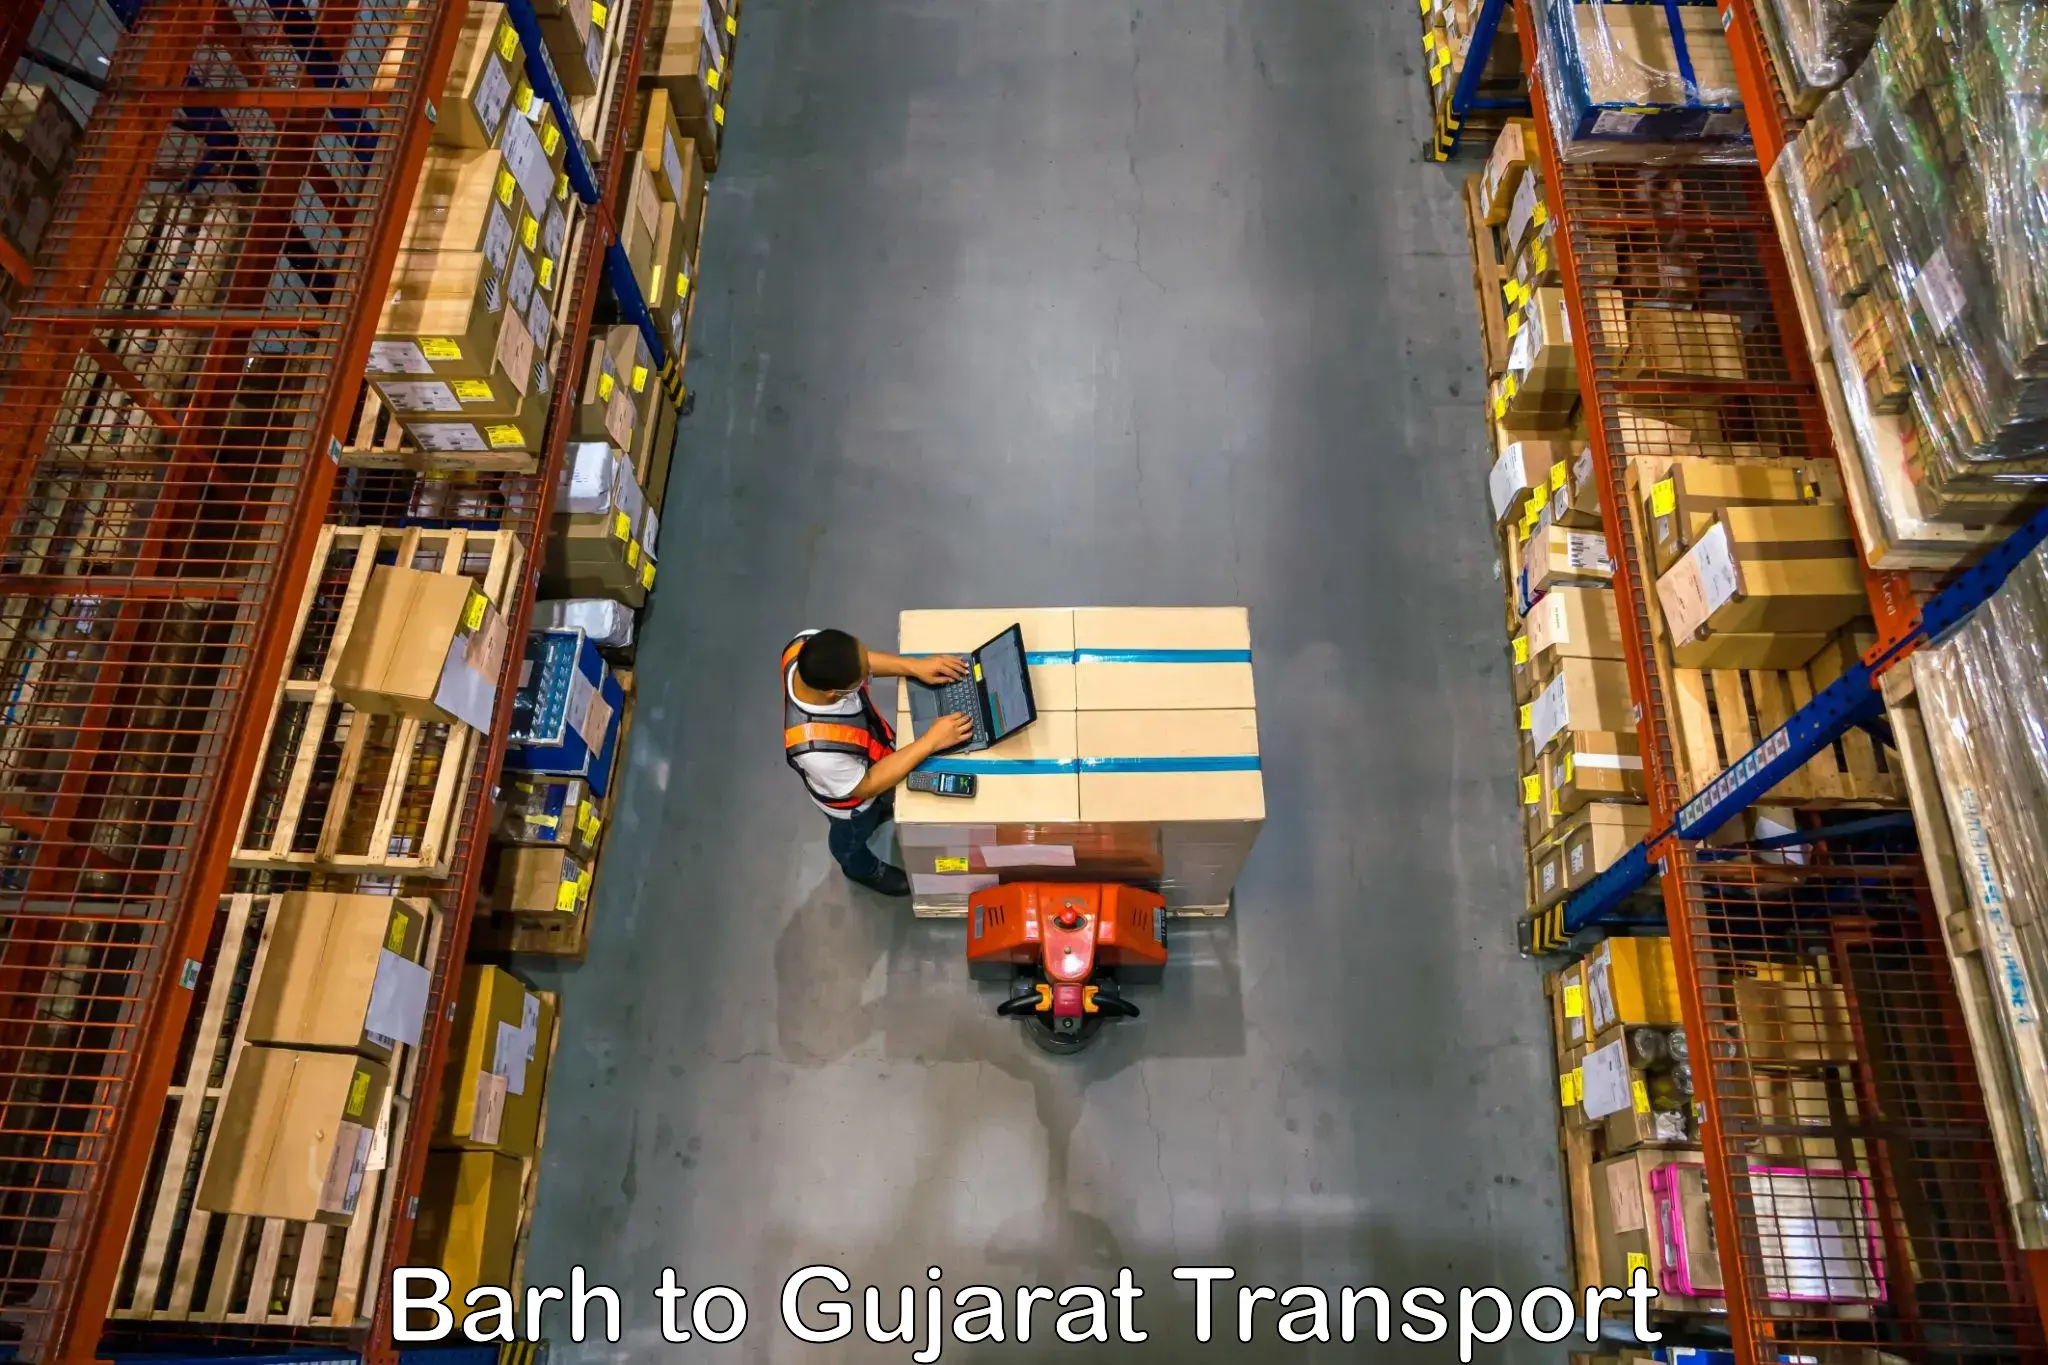 Truck transport companies in India Barh to Chikhli